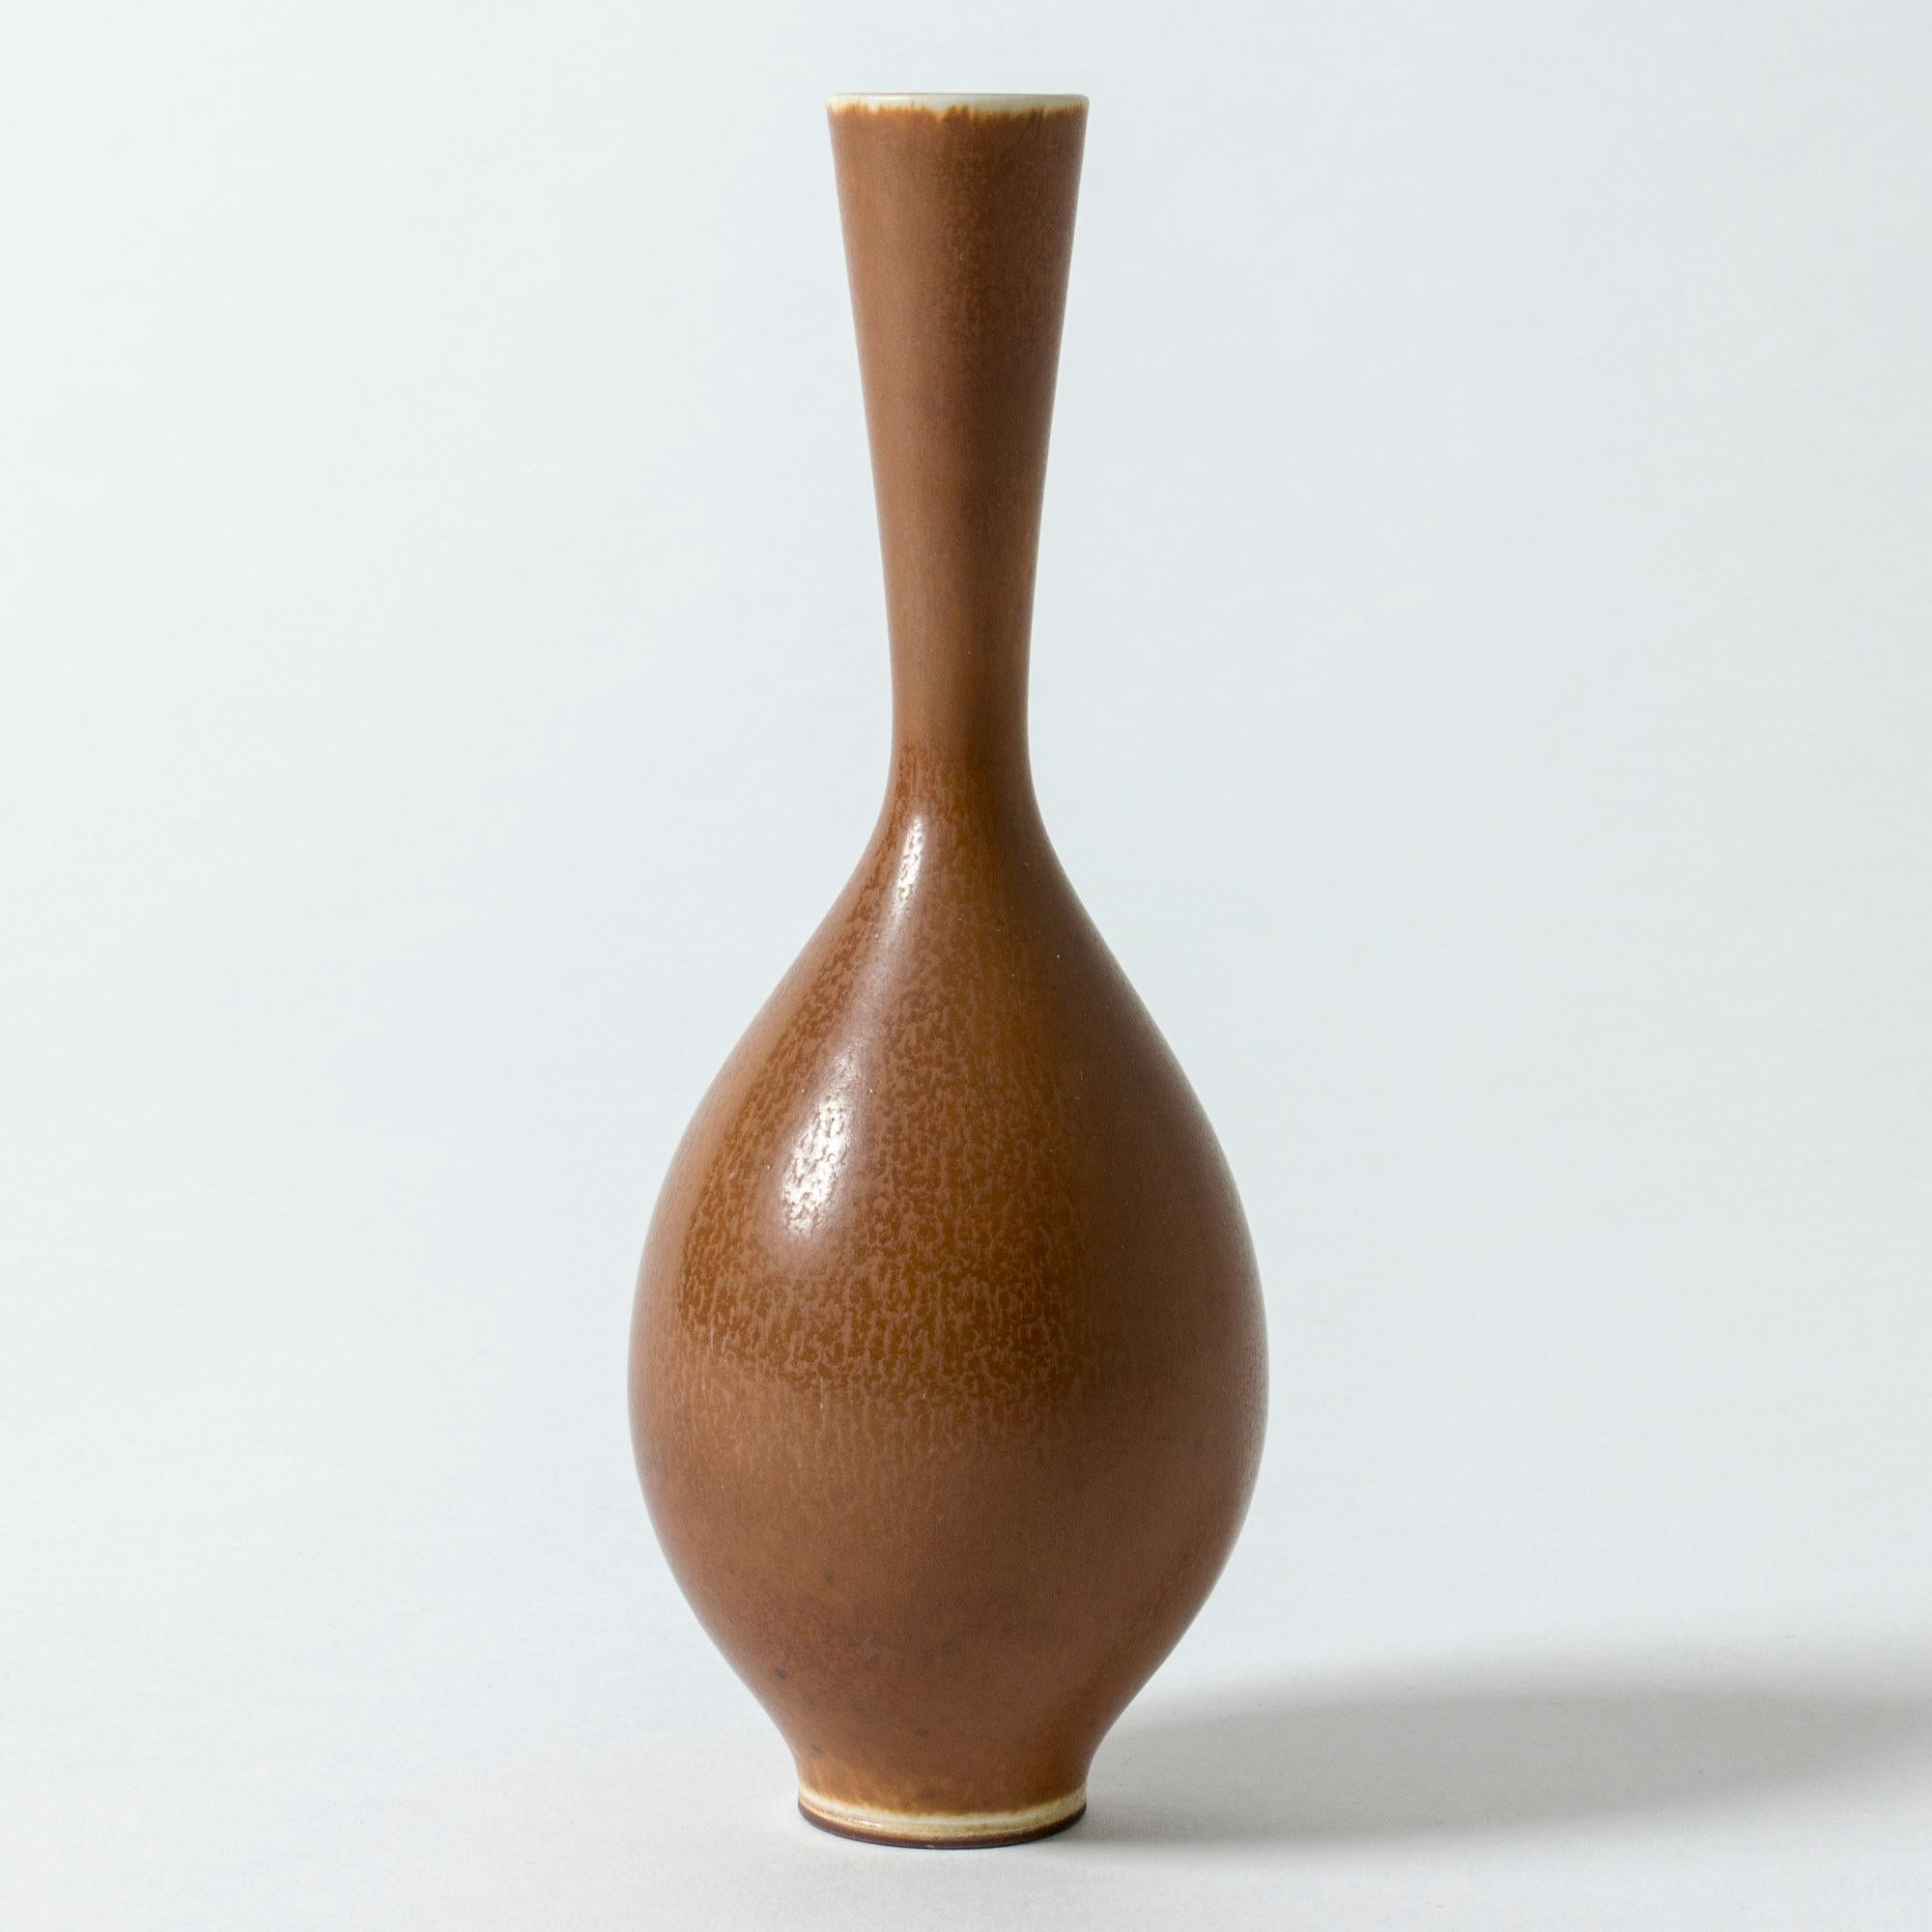 Stoneware vase by Berndt Friberg, in a beautiful, bulbous shape with a long, elegant neck. Rusty brown hare’s fur glaze.